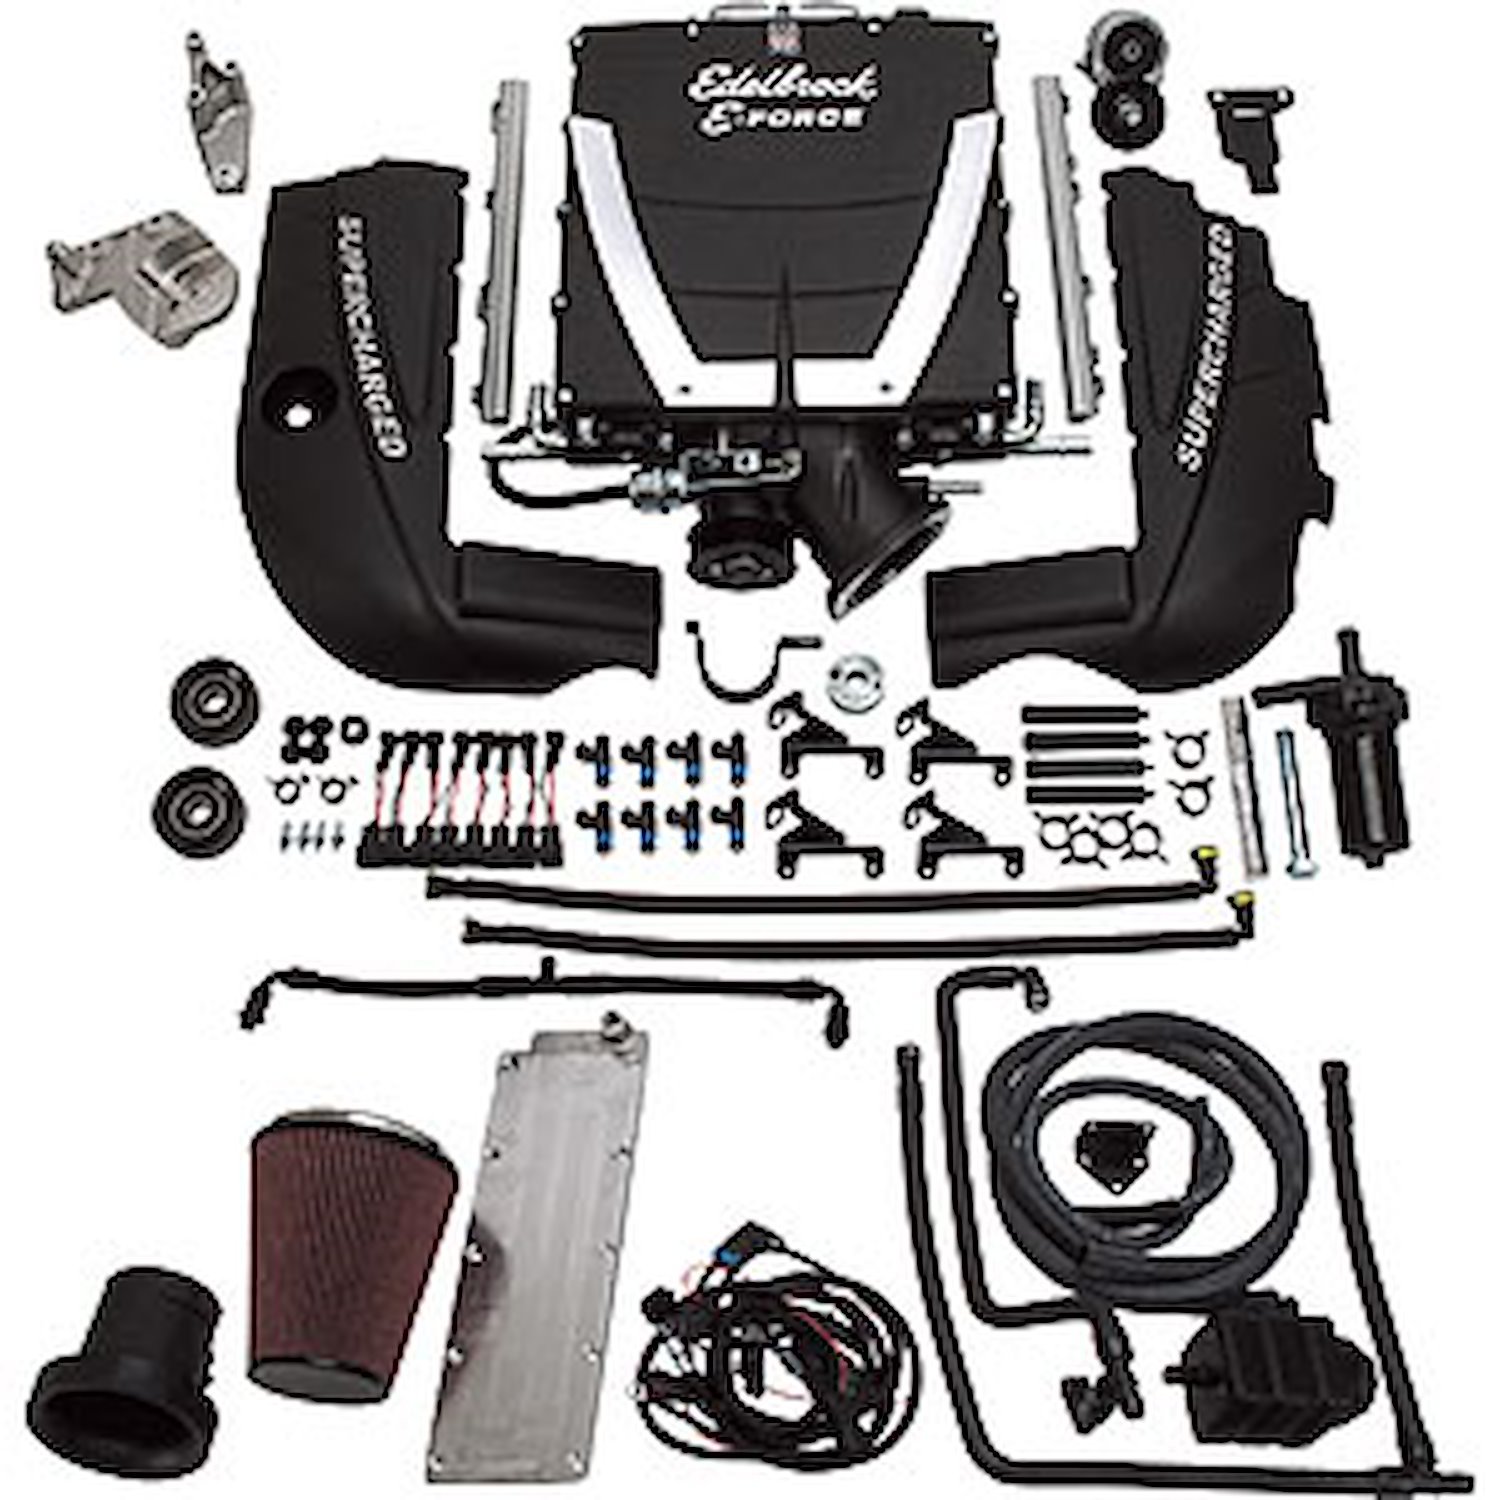 E-Force Universal Supercharger Kit for GM Gen III LS Engine with Truck Accessory Drives